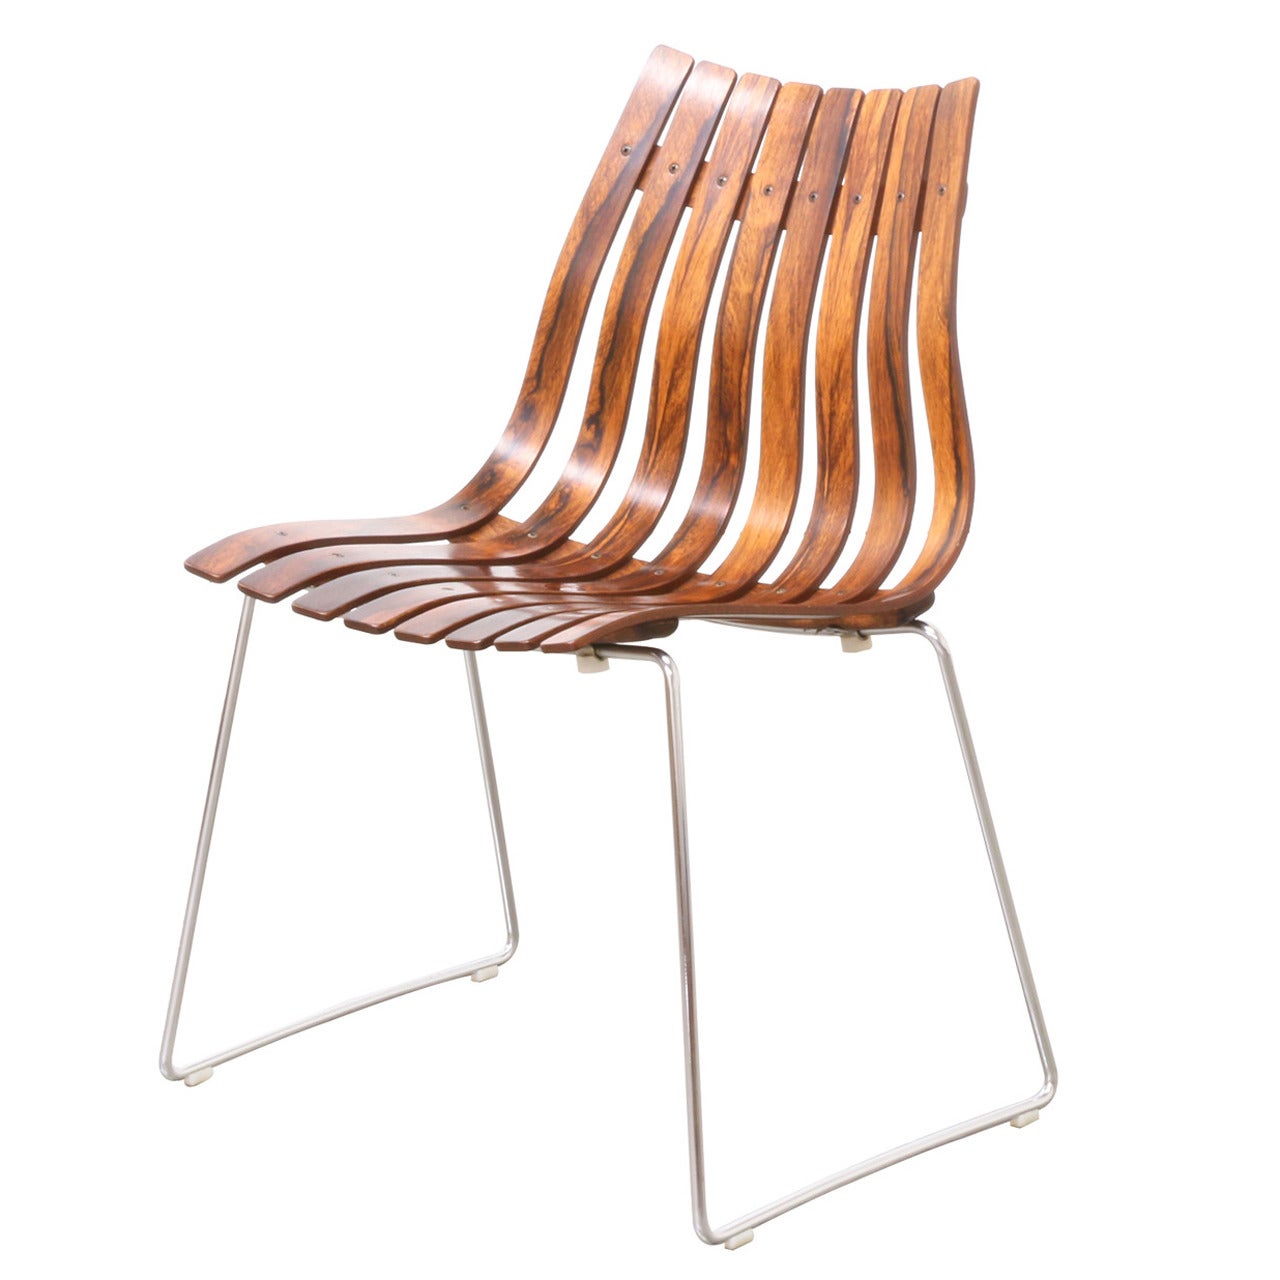 Hans Brattrud “Scandia” Rosewood Chair for Hove Mobler